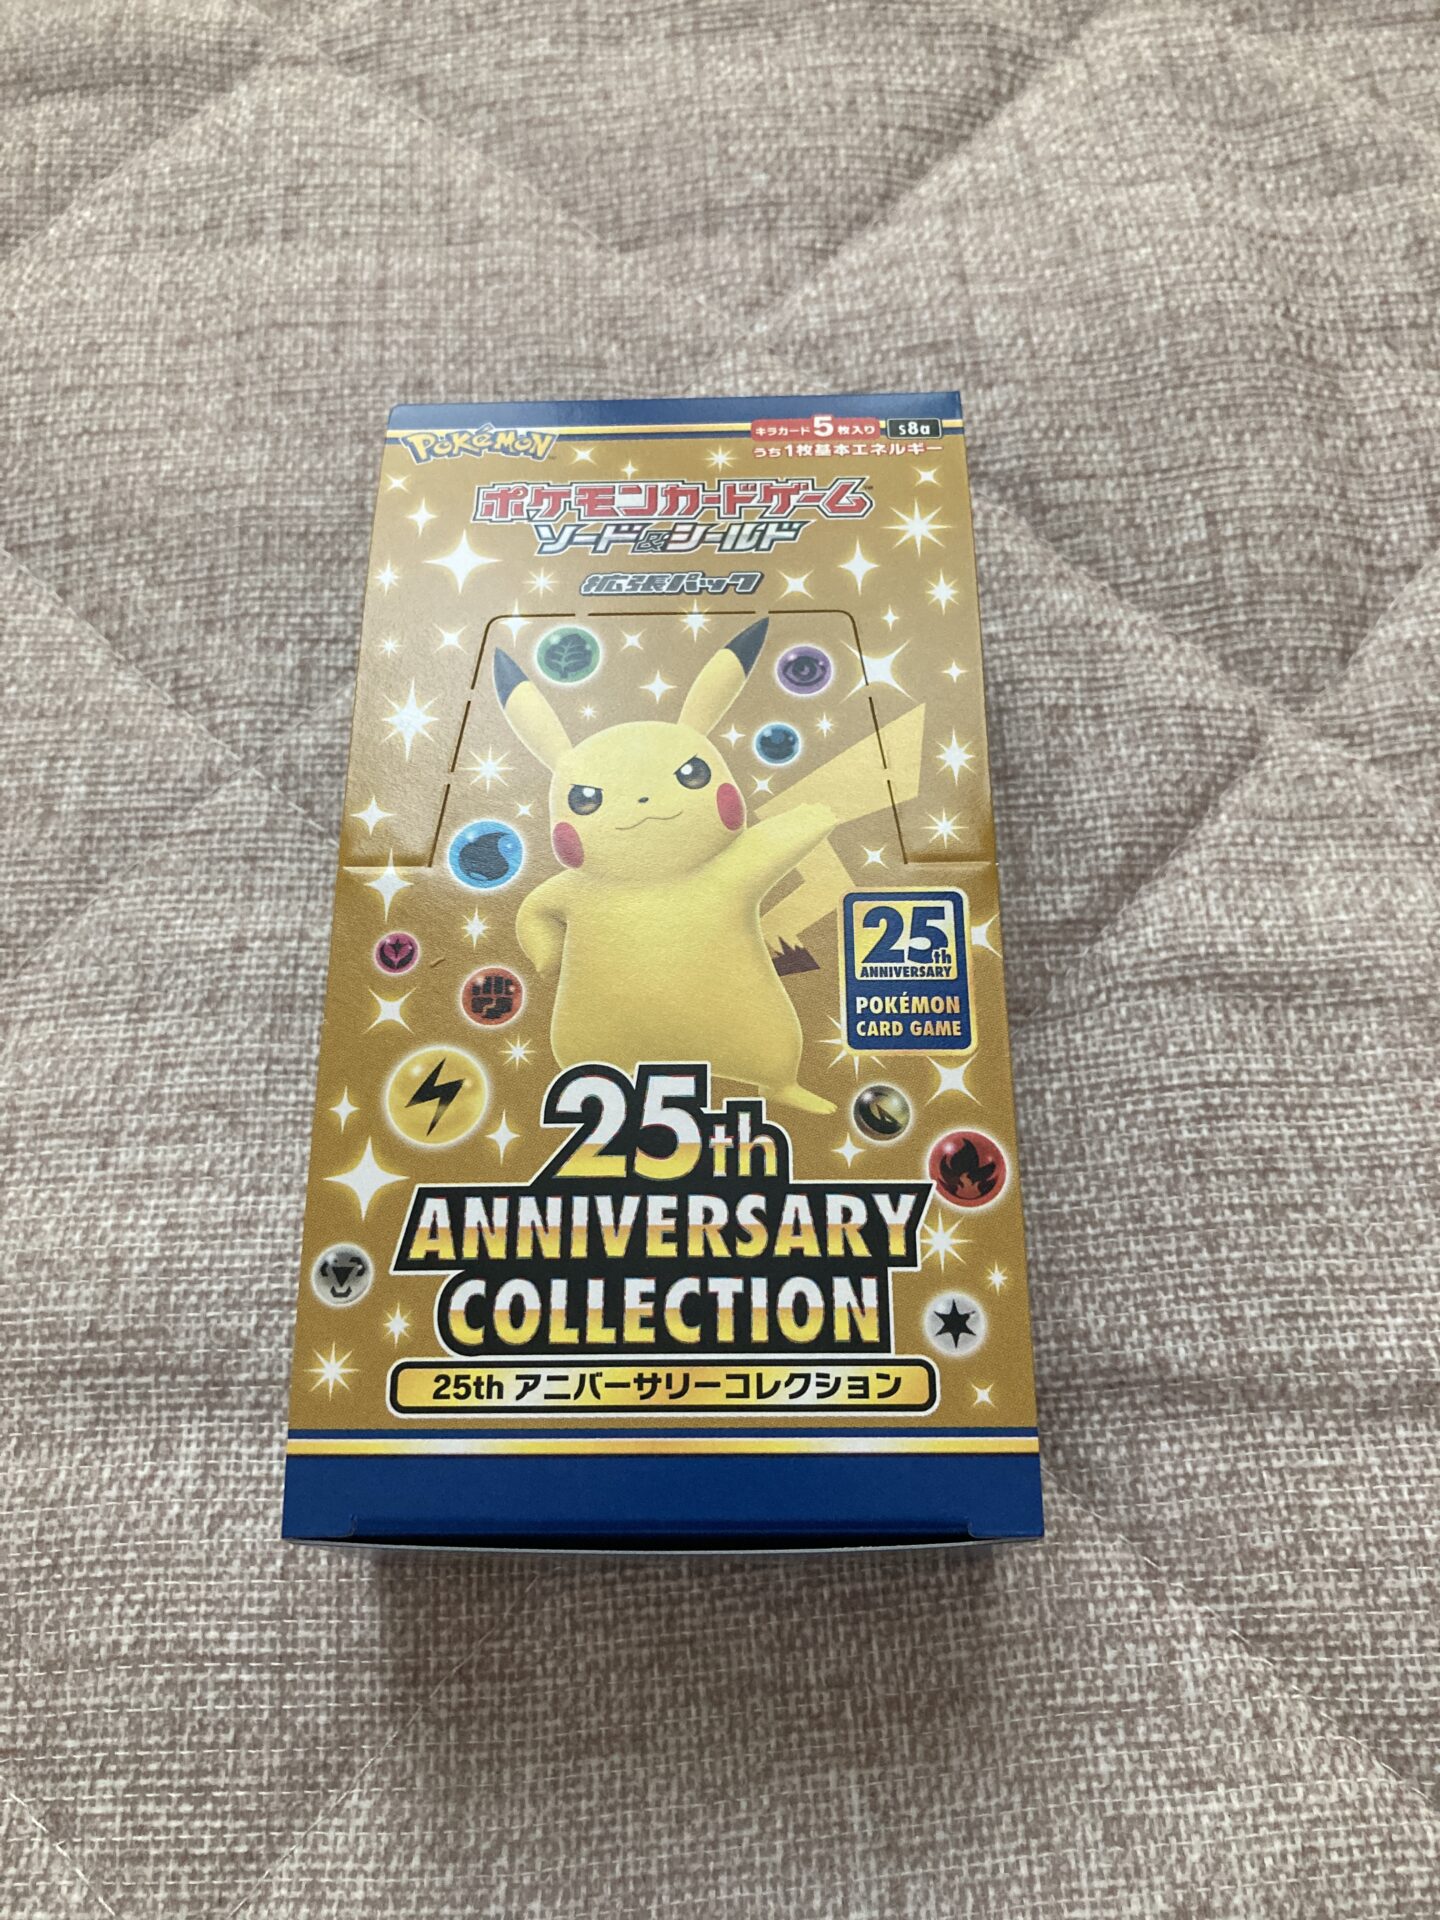 25th ANNIVERSARY COLLECTION　表面